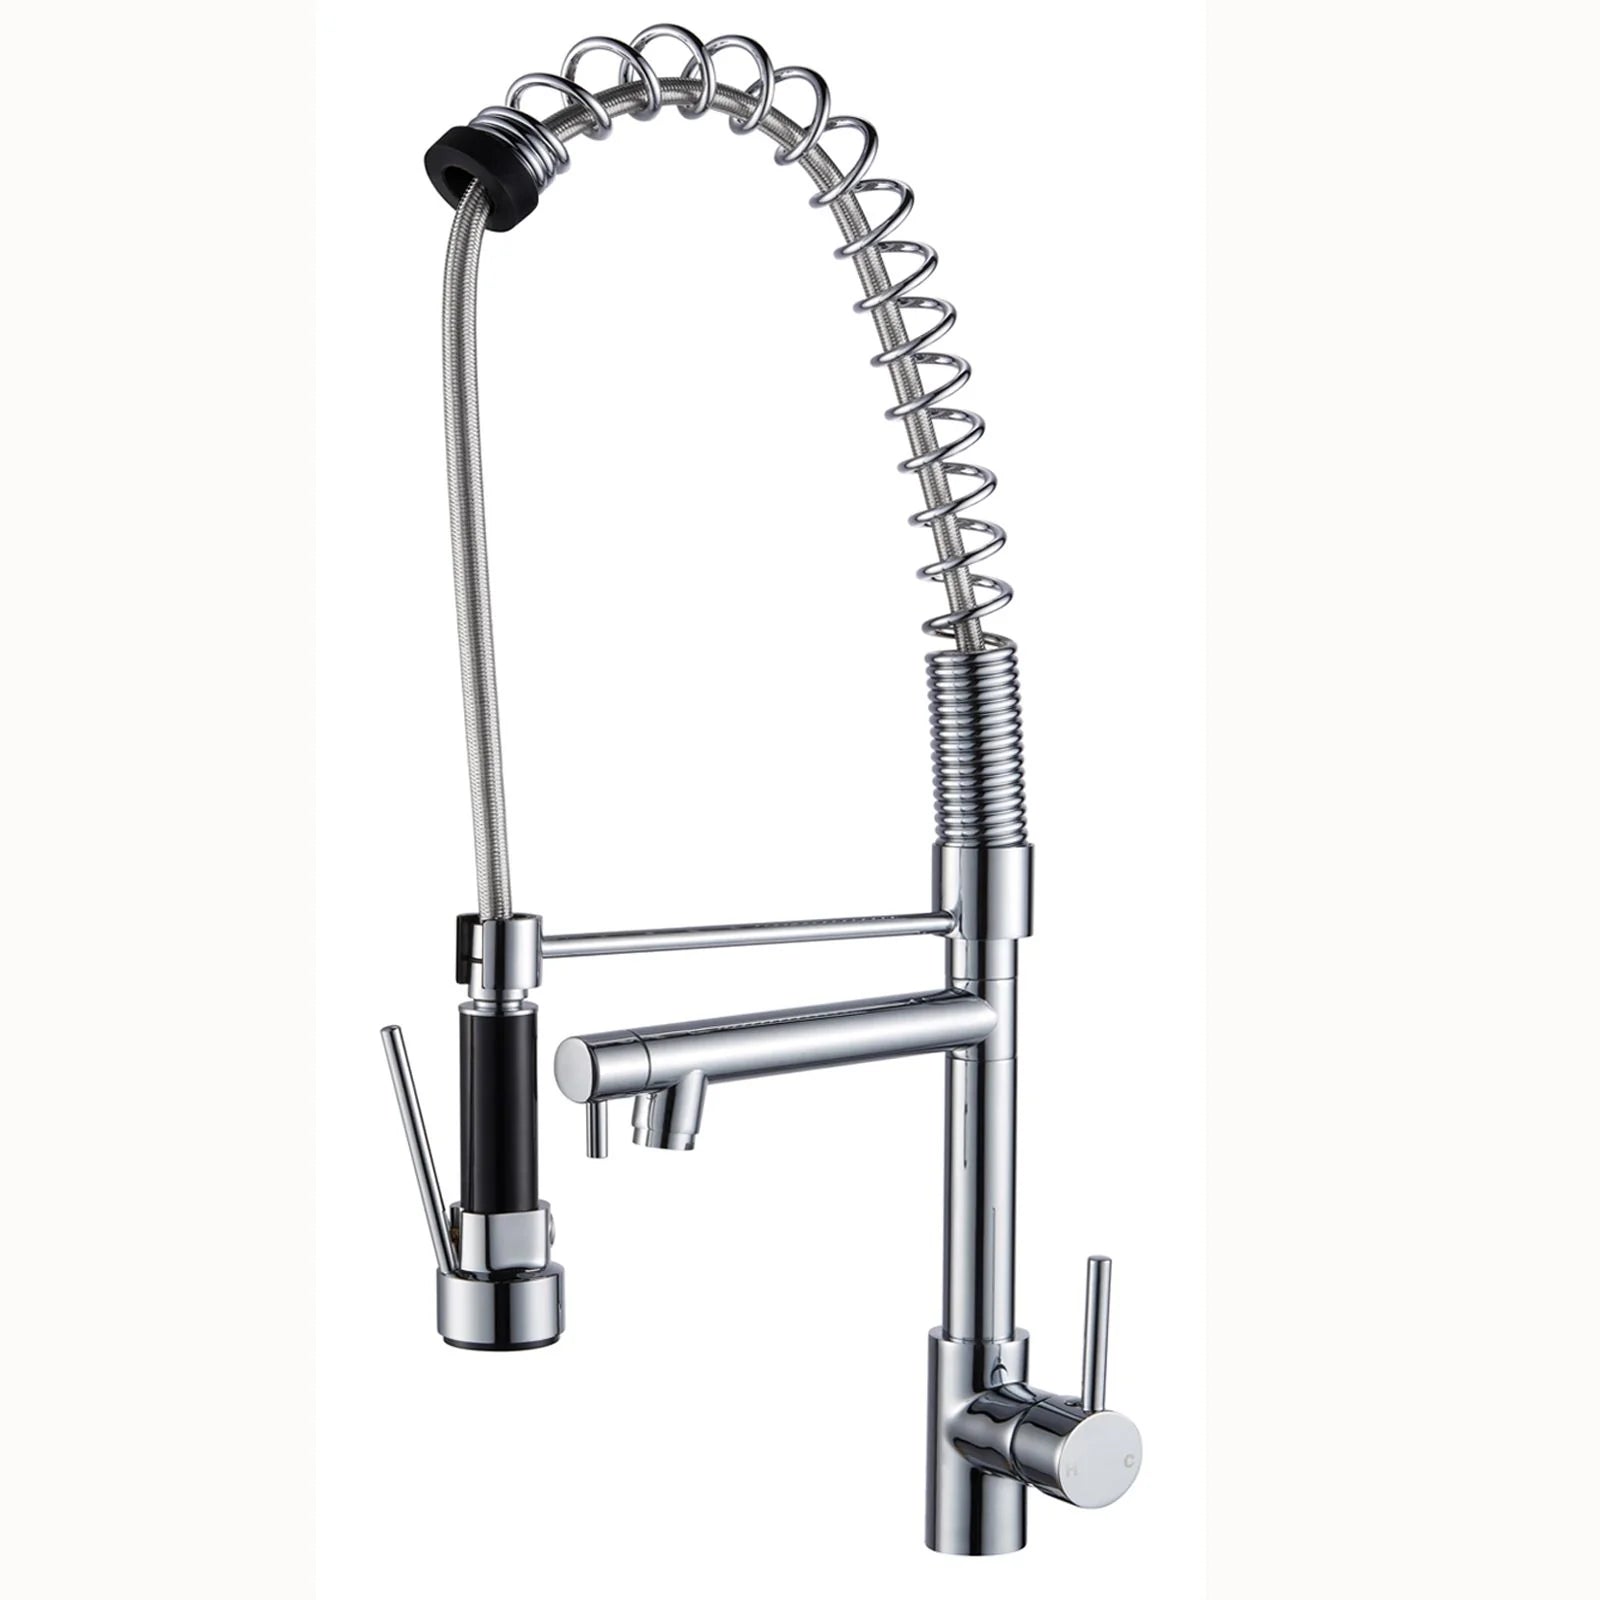 Spring Double Spout Kitchen Sink Mixer Tap: Innovative design for enhanced kitchen functionality-CH1009.KM